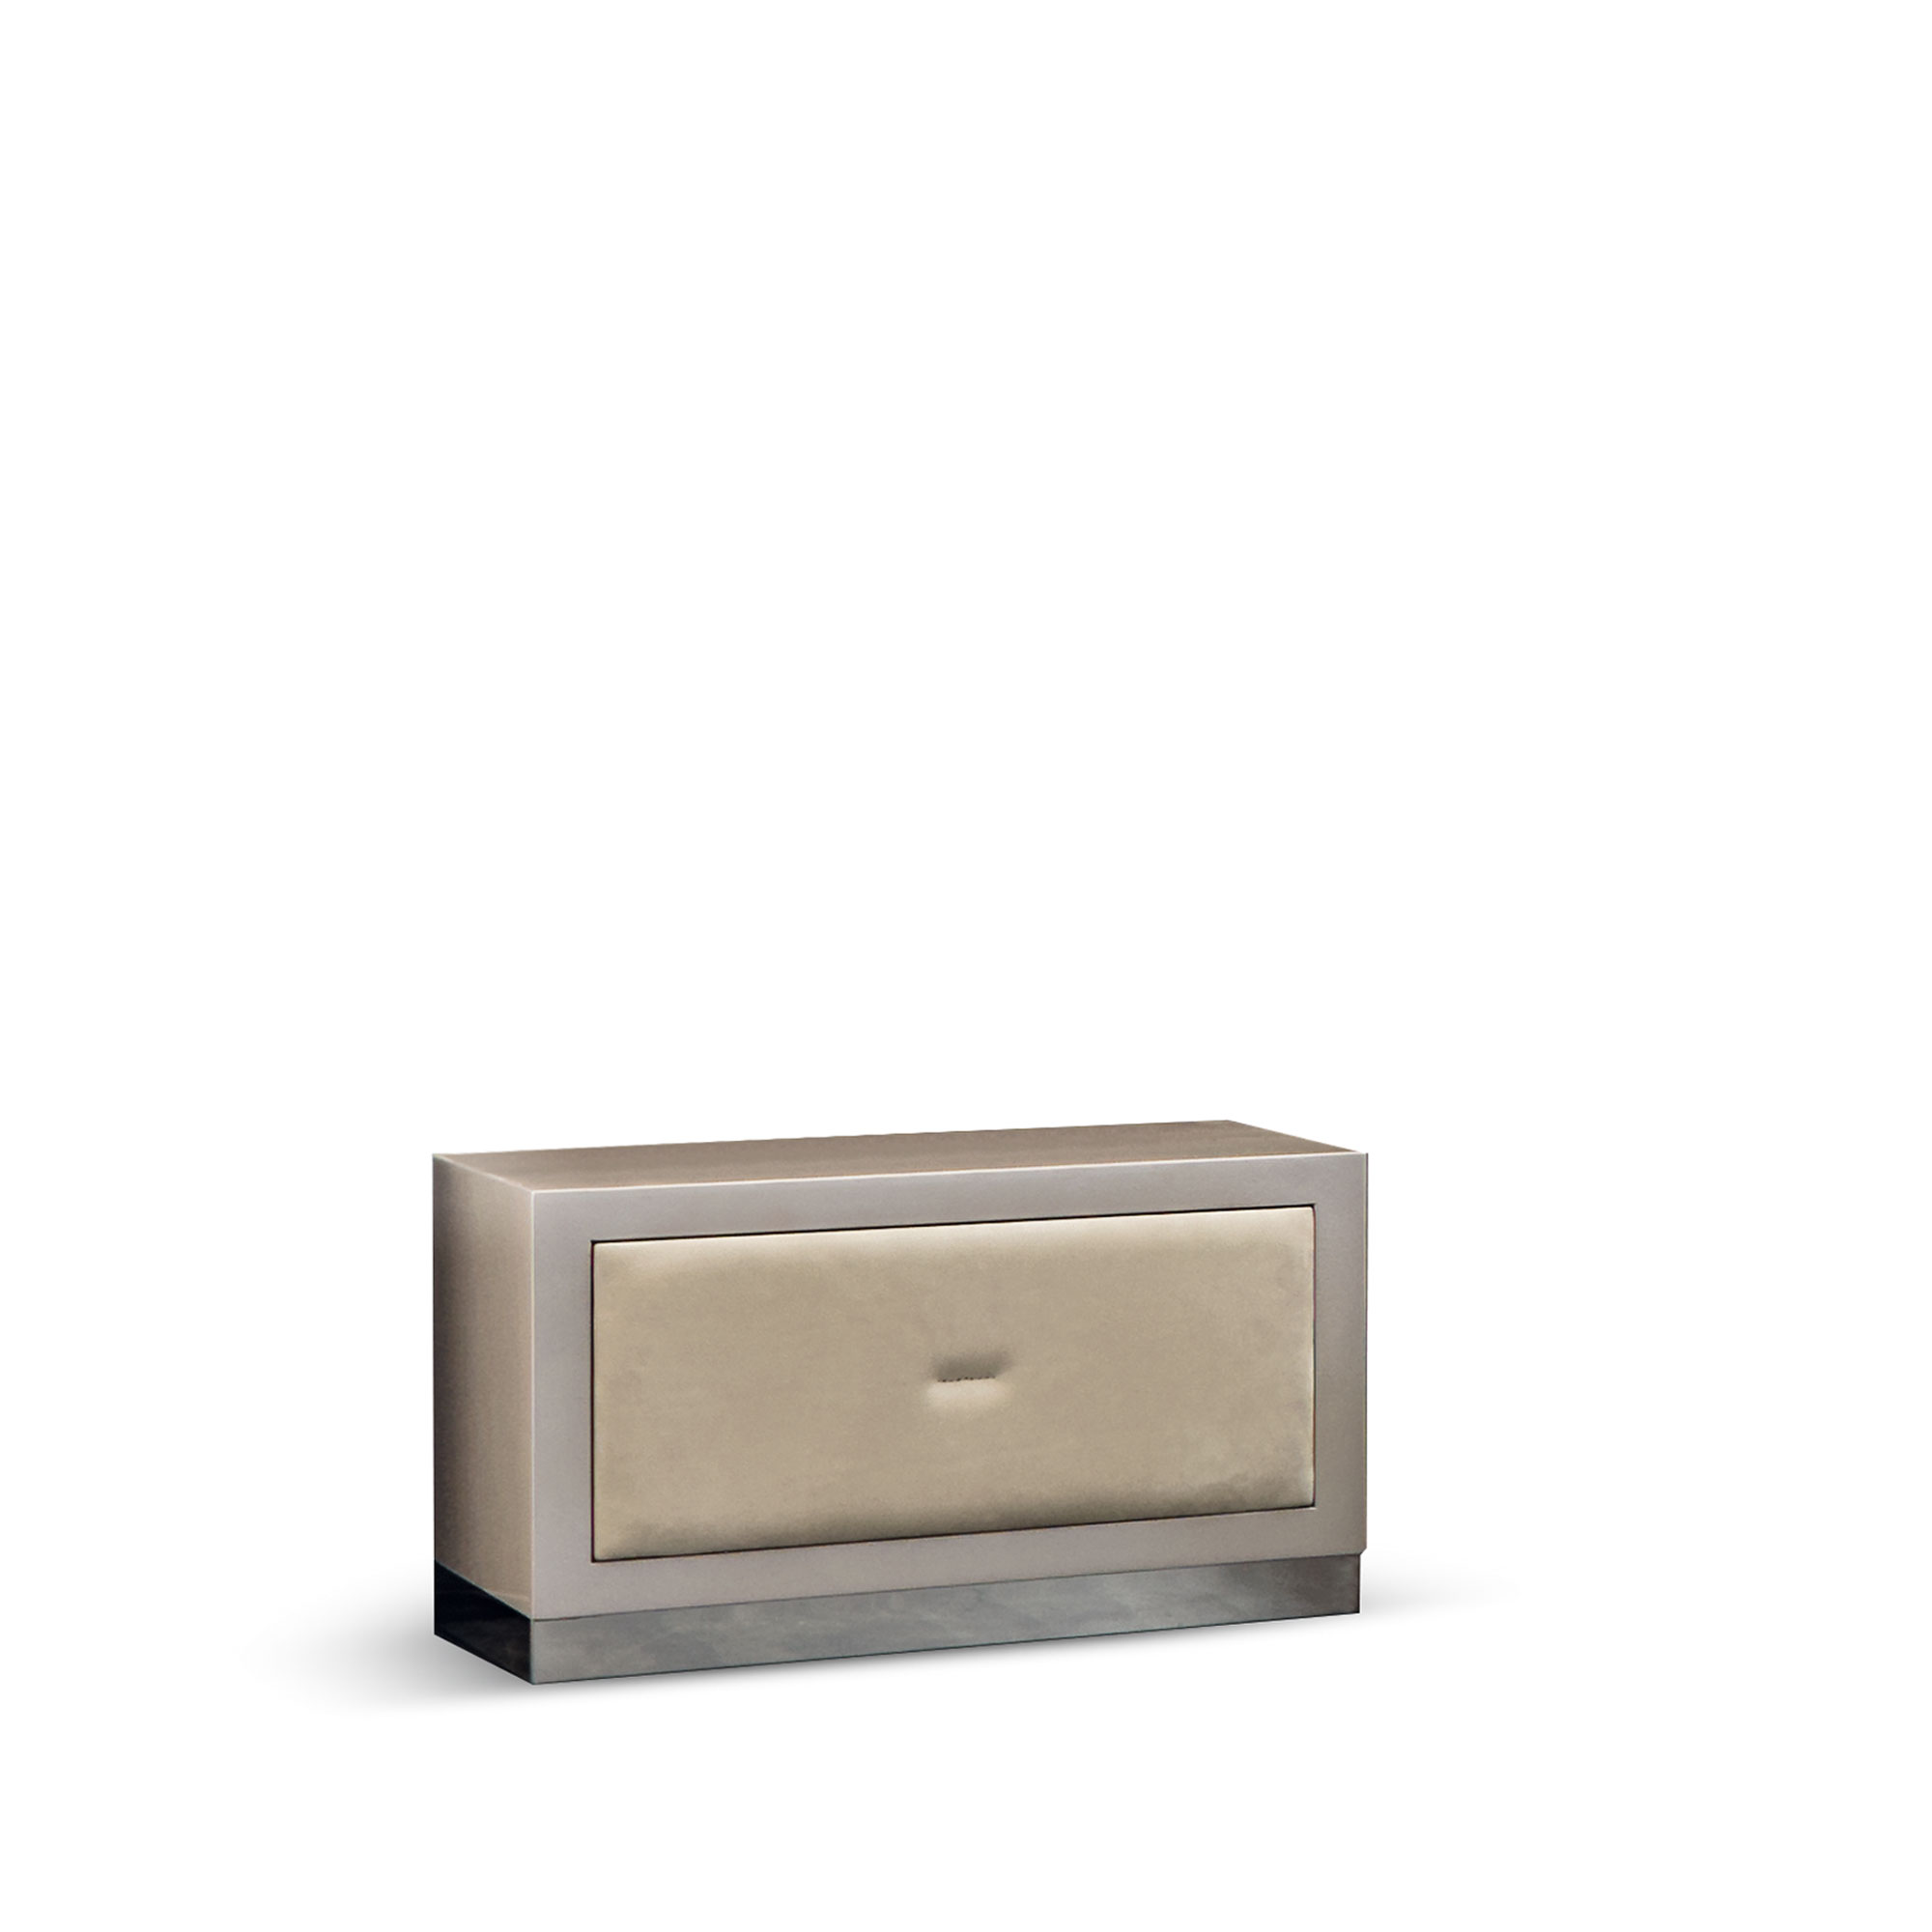 KEOPE – SOFT BEDSIDE TABLE